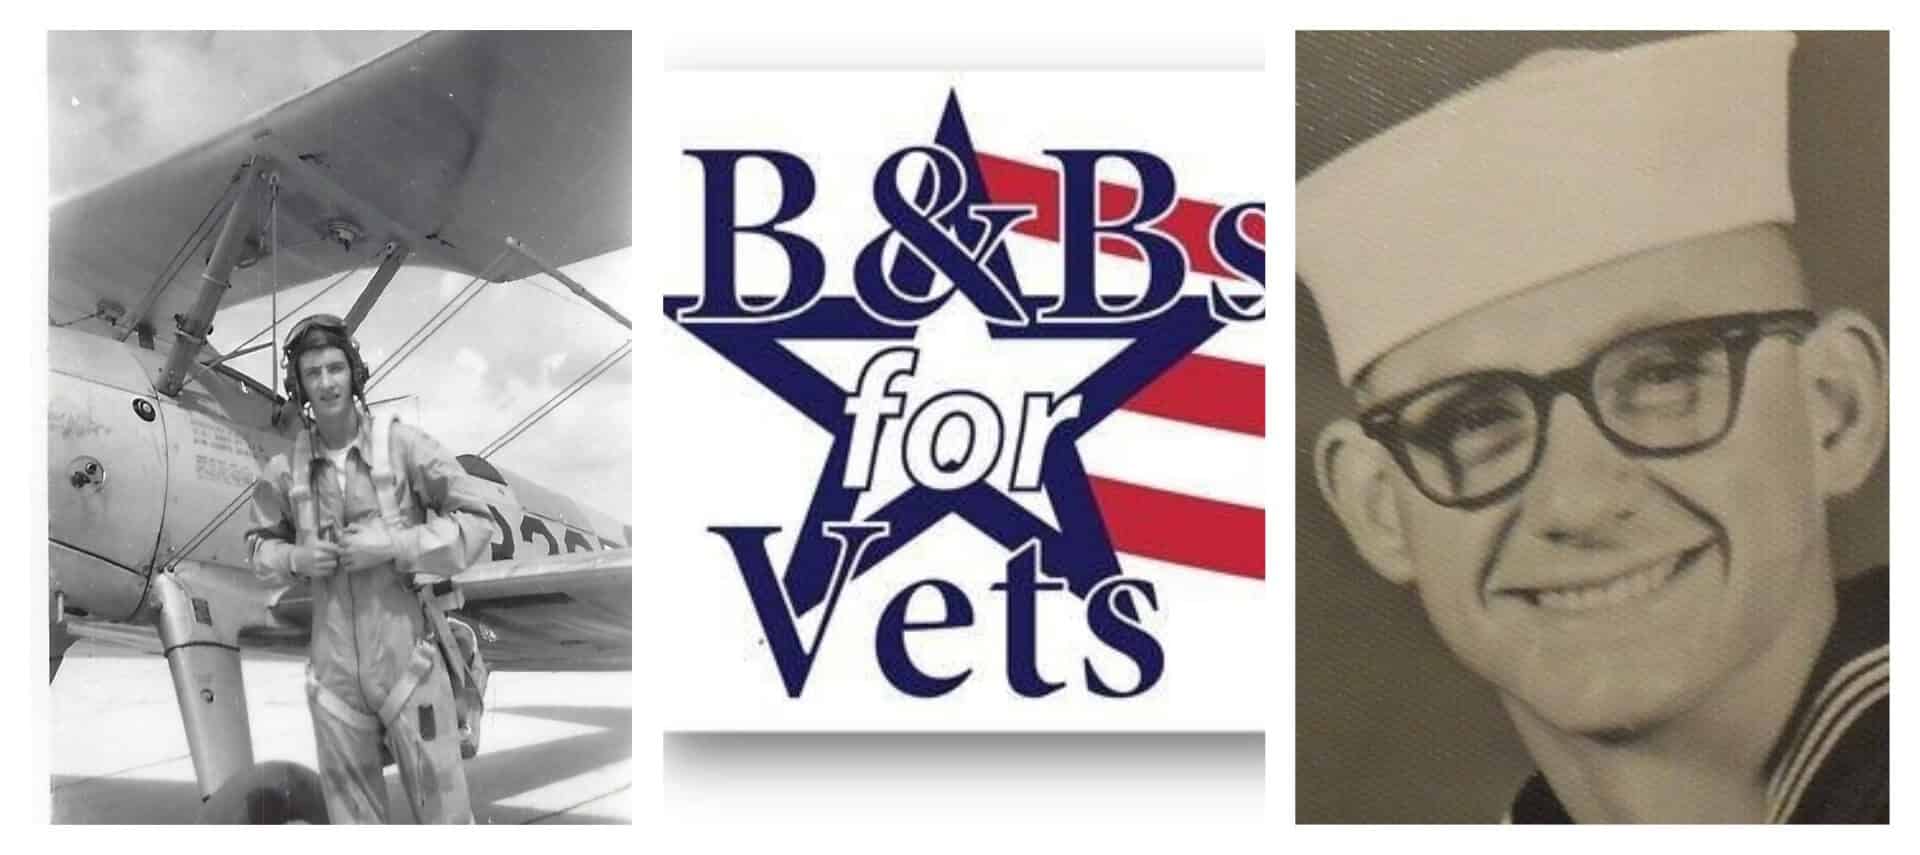 Bnb's for Vets logo with two photos of American servicemen